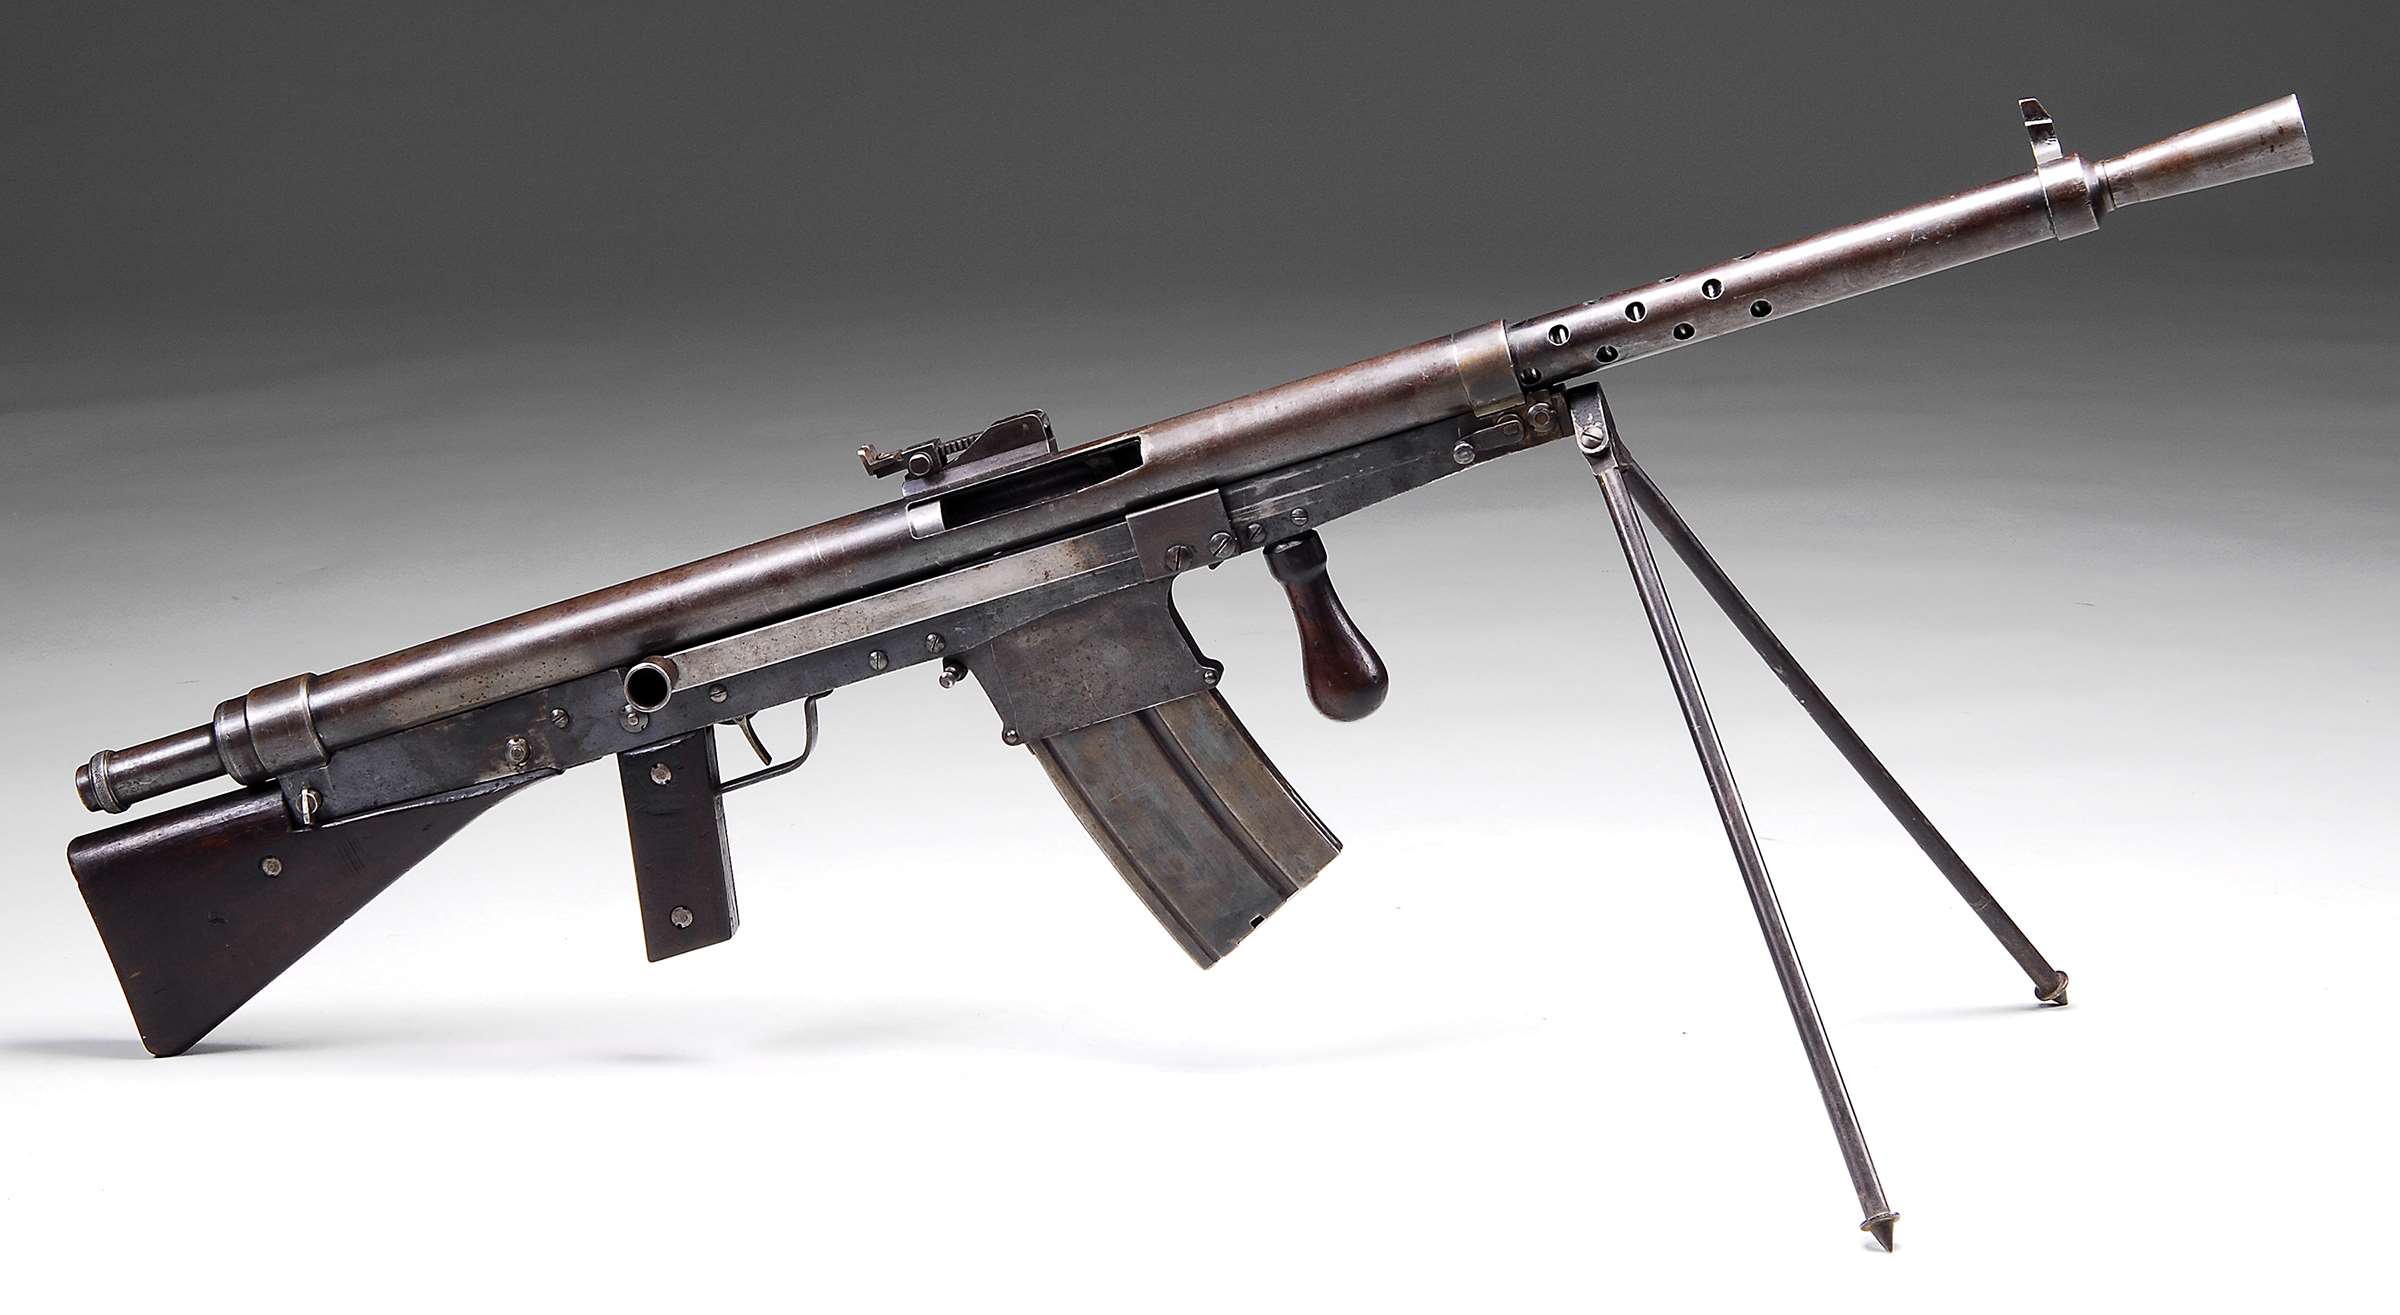 Right-side view on white and gray background of an example of the .30-&#x27;06 Sprg. caliber Fusil Mitrailleur Modéle 1918 CSRG Chauchat Light Machine Gun with the different magazine and verticle foregrip location. (Photograph courtesy of  James D. Julia Auctioneers)